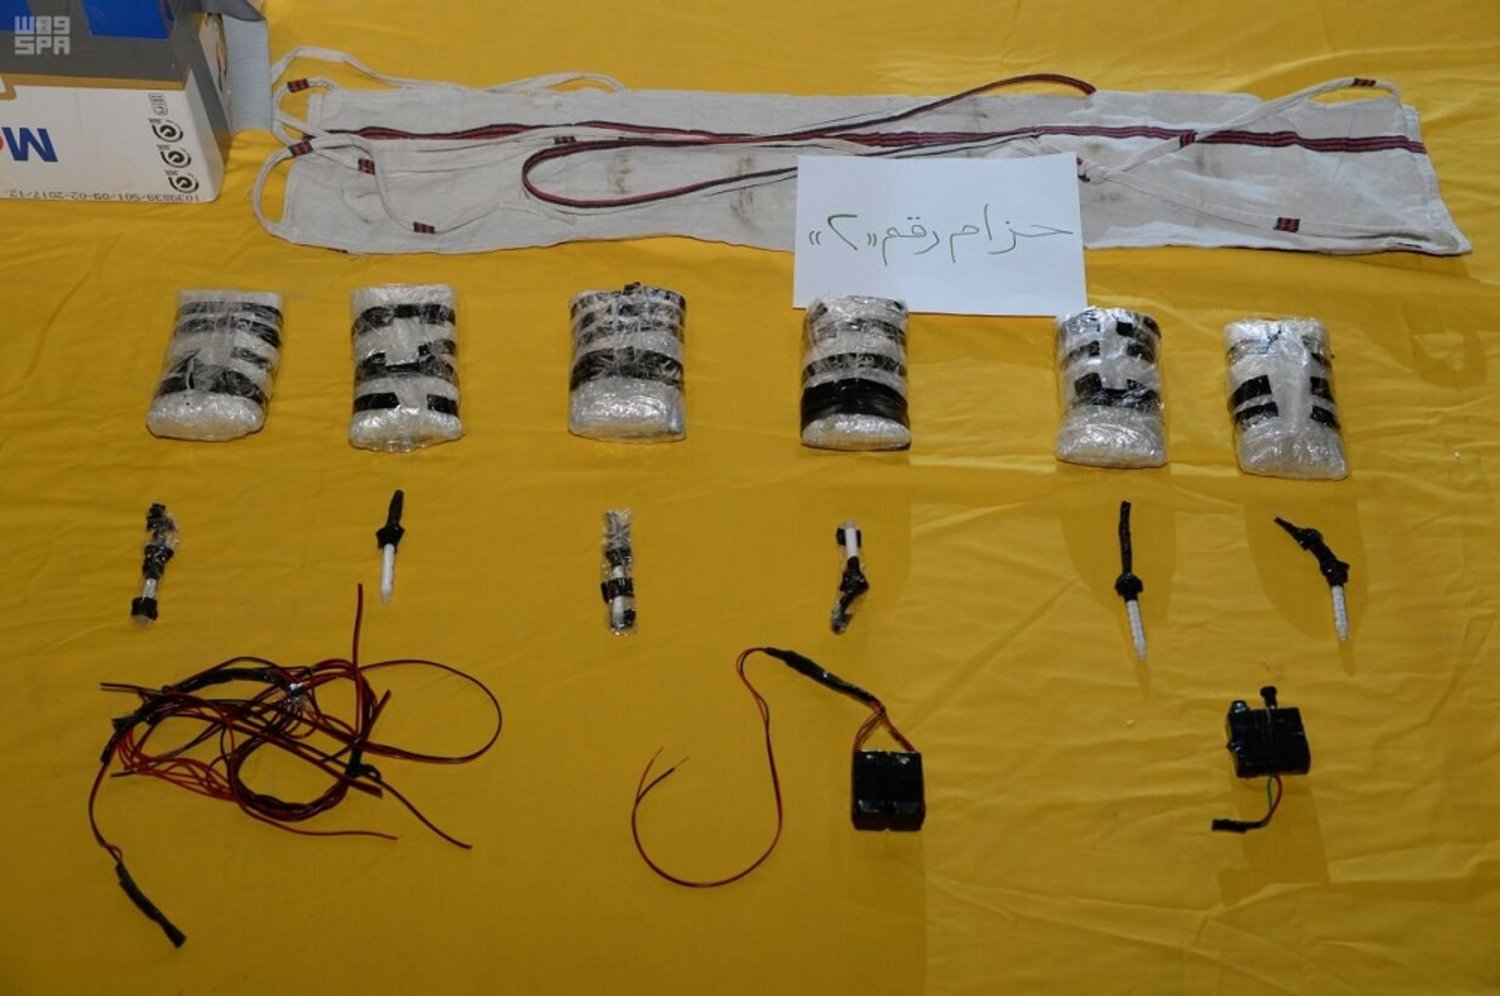 One of the explosives belts discovered with the would-be suicide bombers arrested by Saudi security. (SPA)